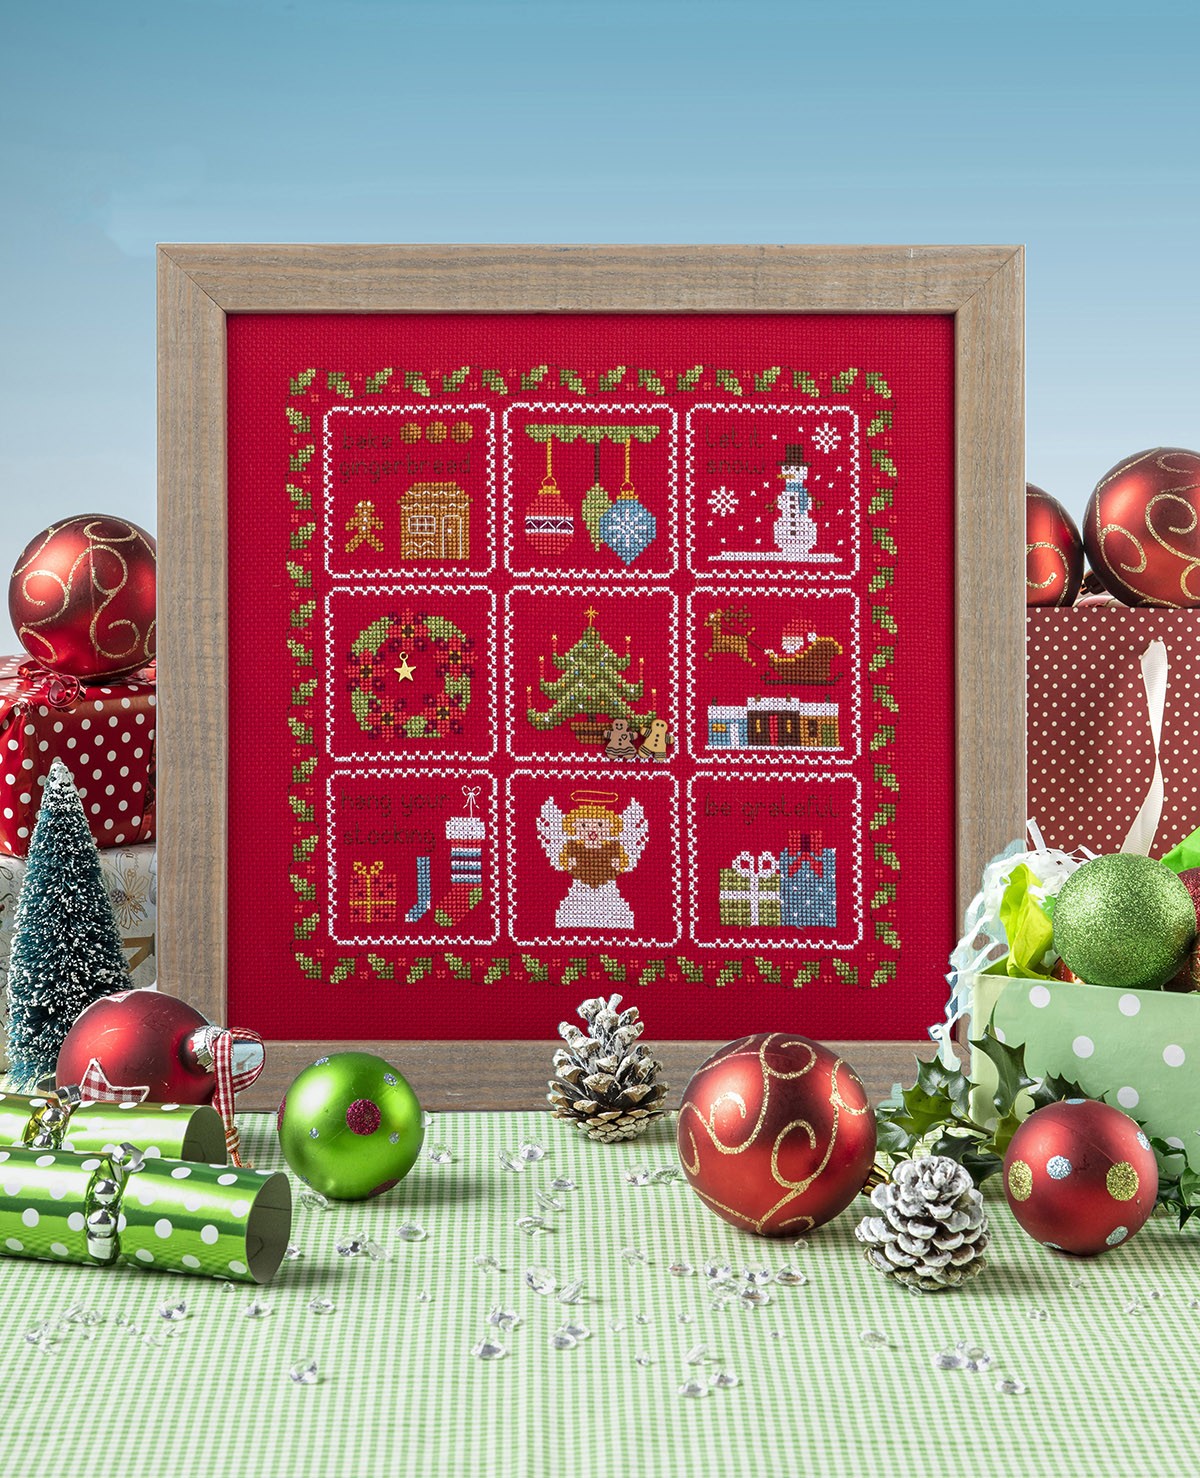 Cross Stitcher Project Pack - issue 391 - Glad Tidings Materials Pack